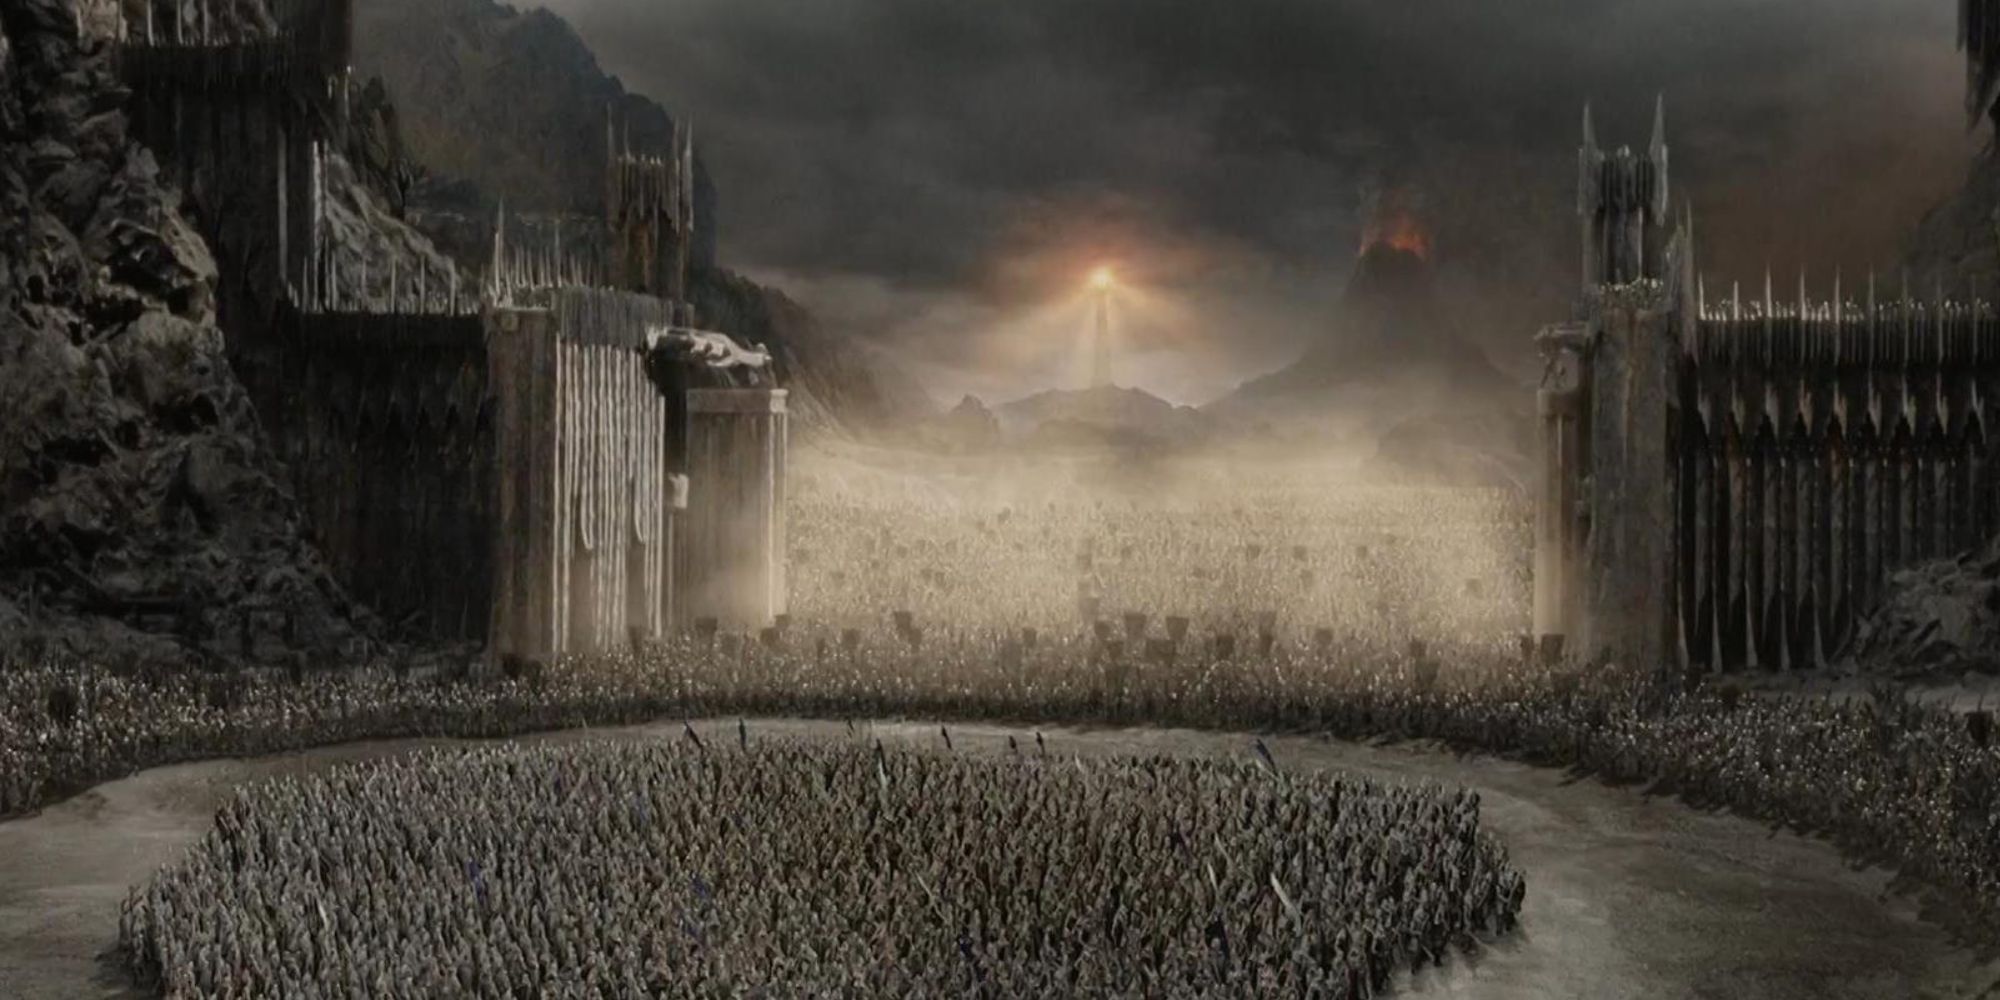 The armies of the dark surrounded the armies of the light as the black gate opens